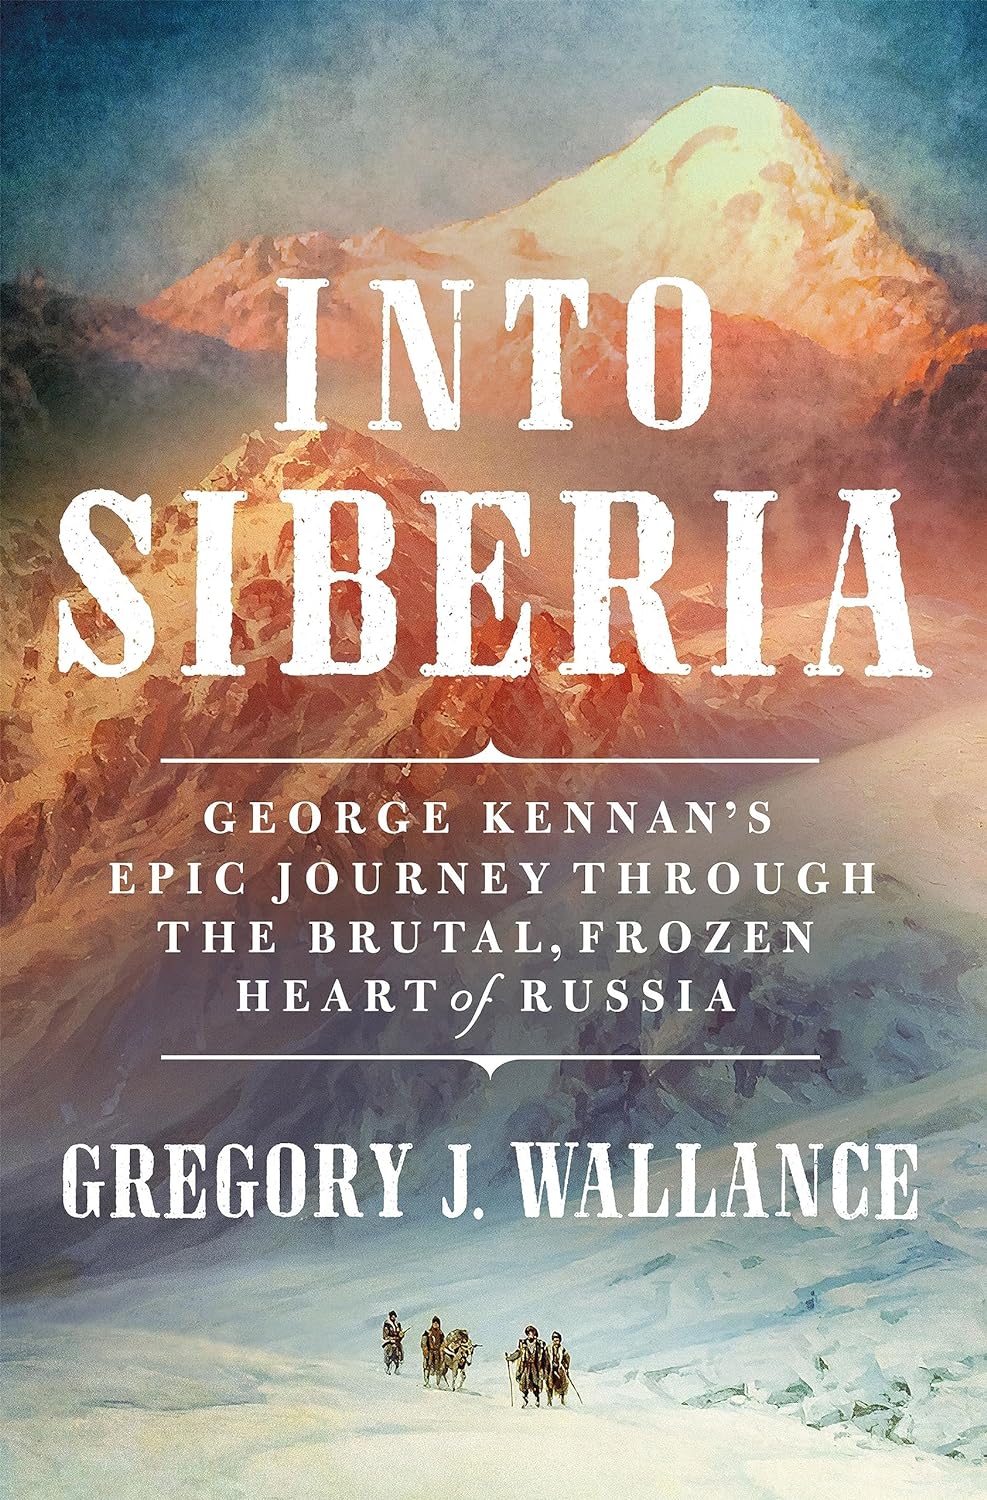 a graphic of the cover of Into Siberia: George Kennan's Epic Journey Through the Brutal, Frozen Heart of Russia by Gregory J. Wallance